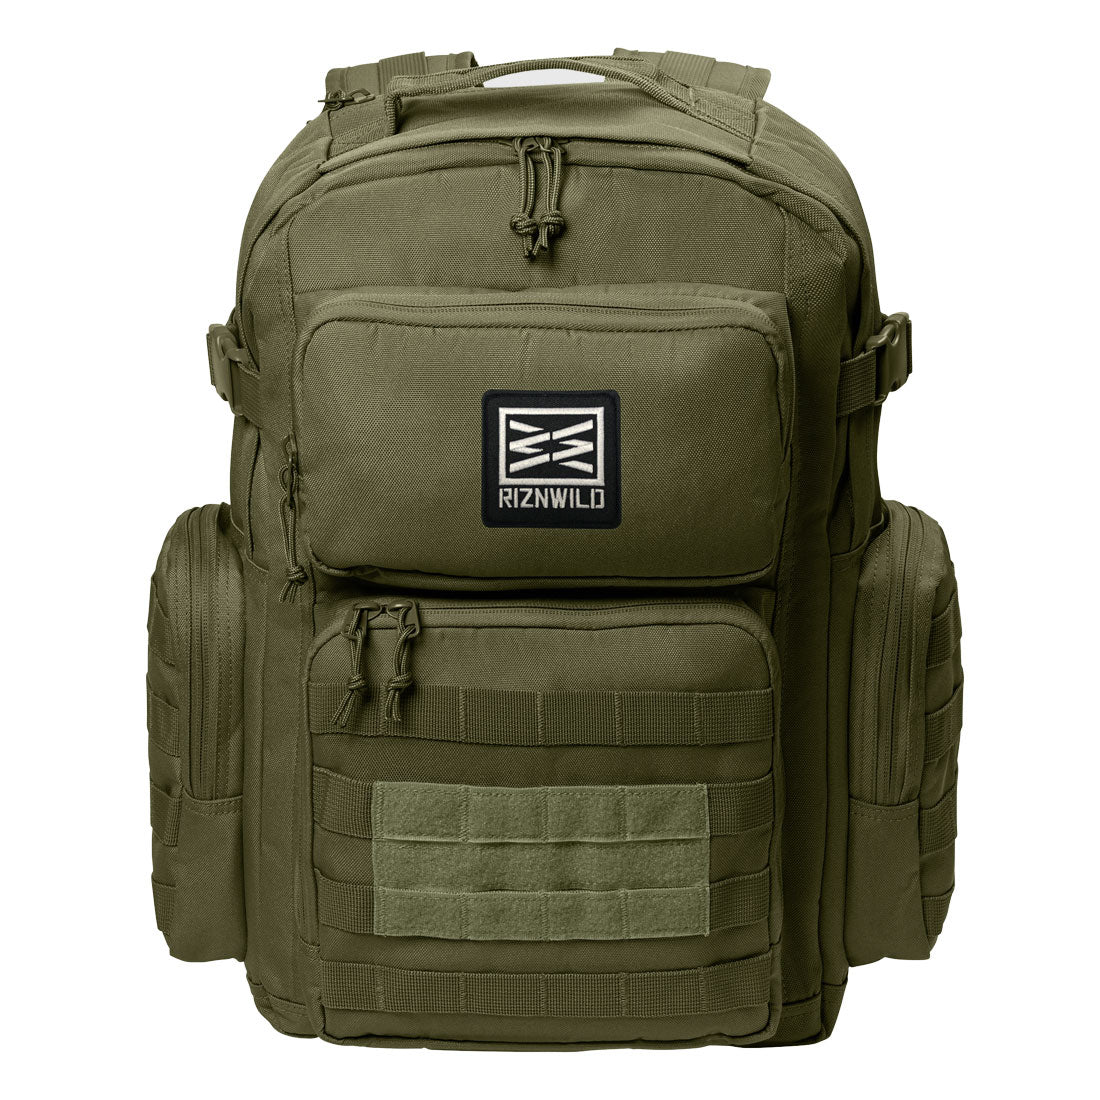 BASIC TACTICAL BACKPACK IN OLIVE DRAB GREEN